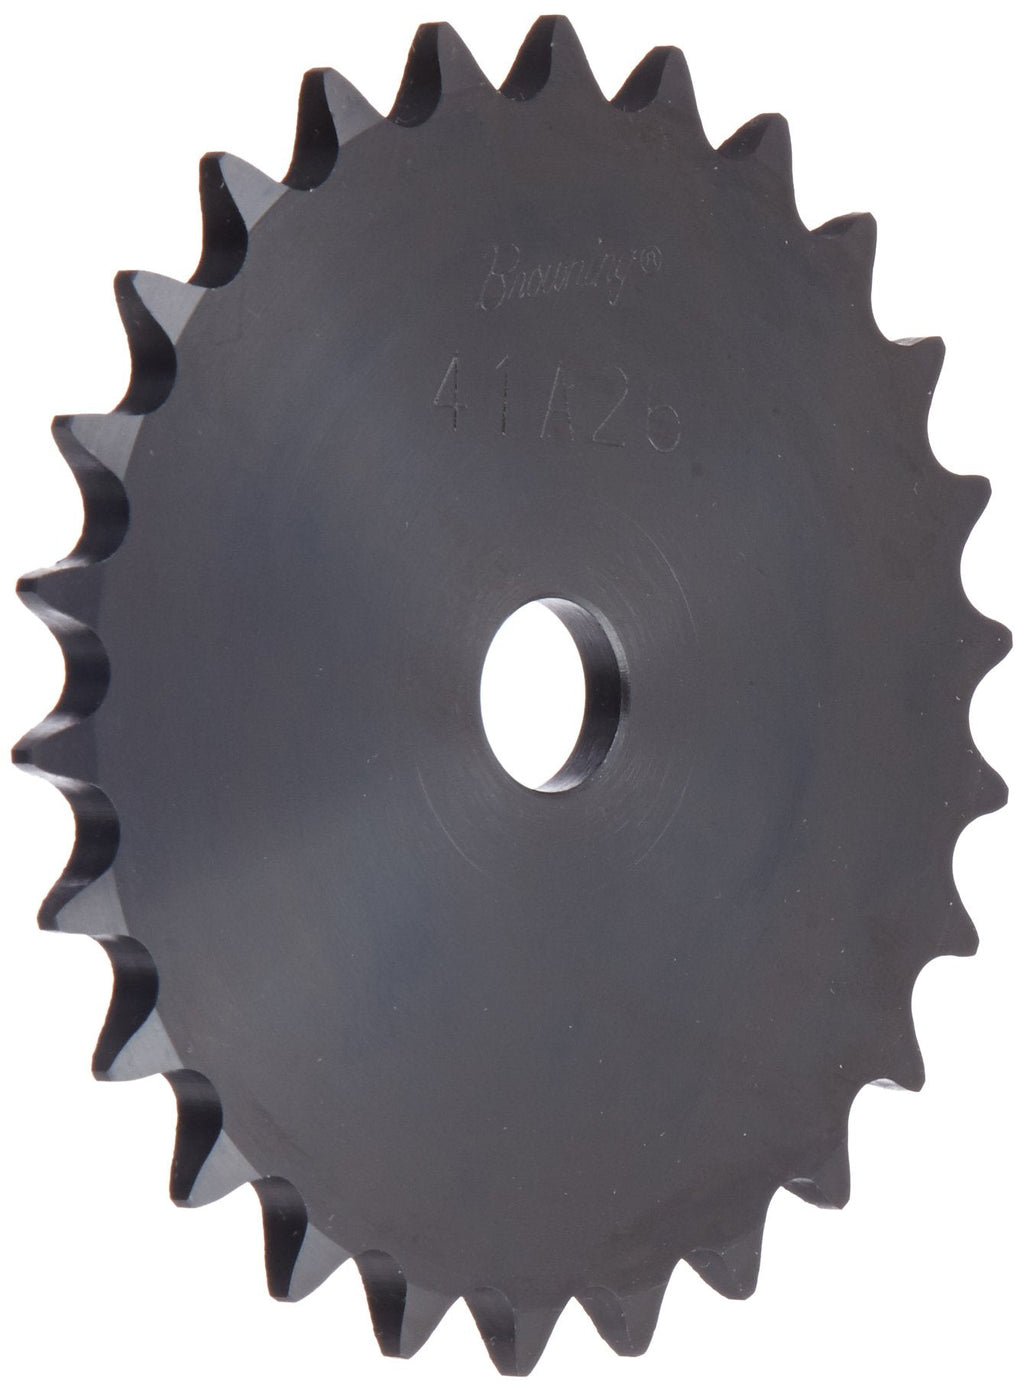  [AUSTRALIA] - Browning 41A26 Plate Roller Chain Sprocket, Single Strand, Type A Hub, Steel, 5/8" Stocked Bore, 26 Teeth